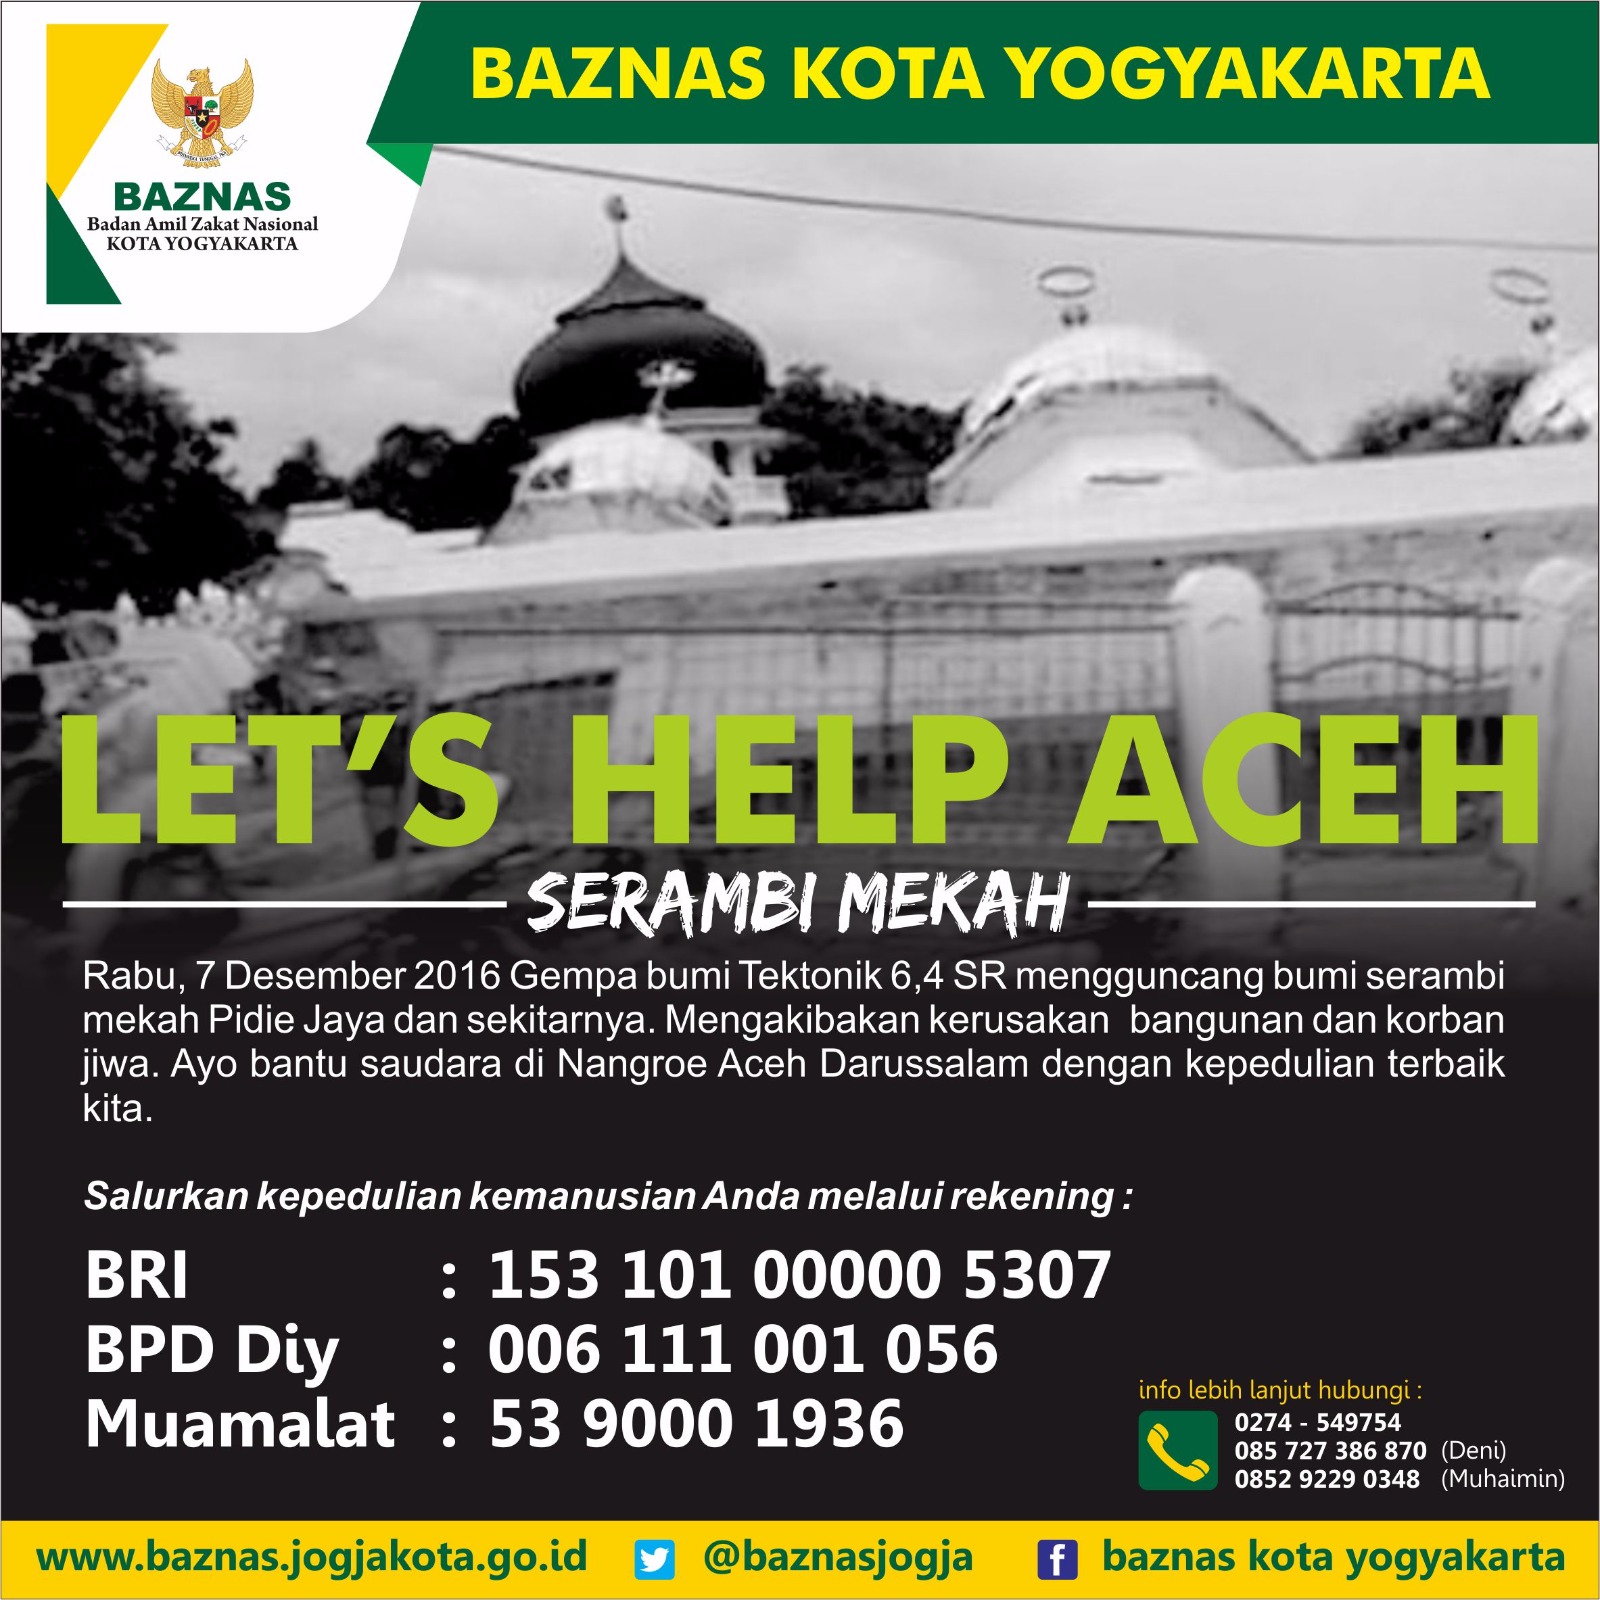 Let's Help Aceh